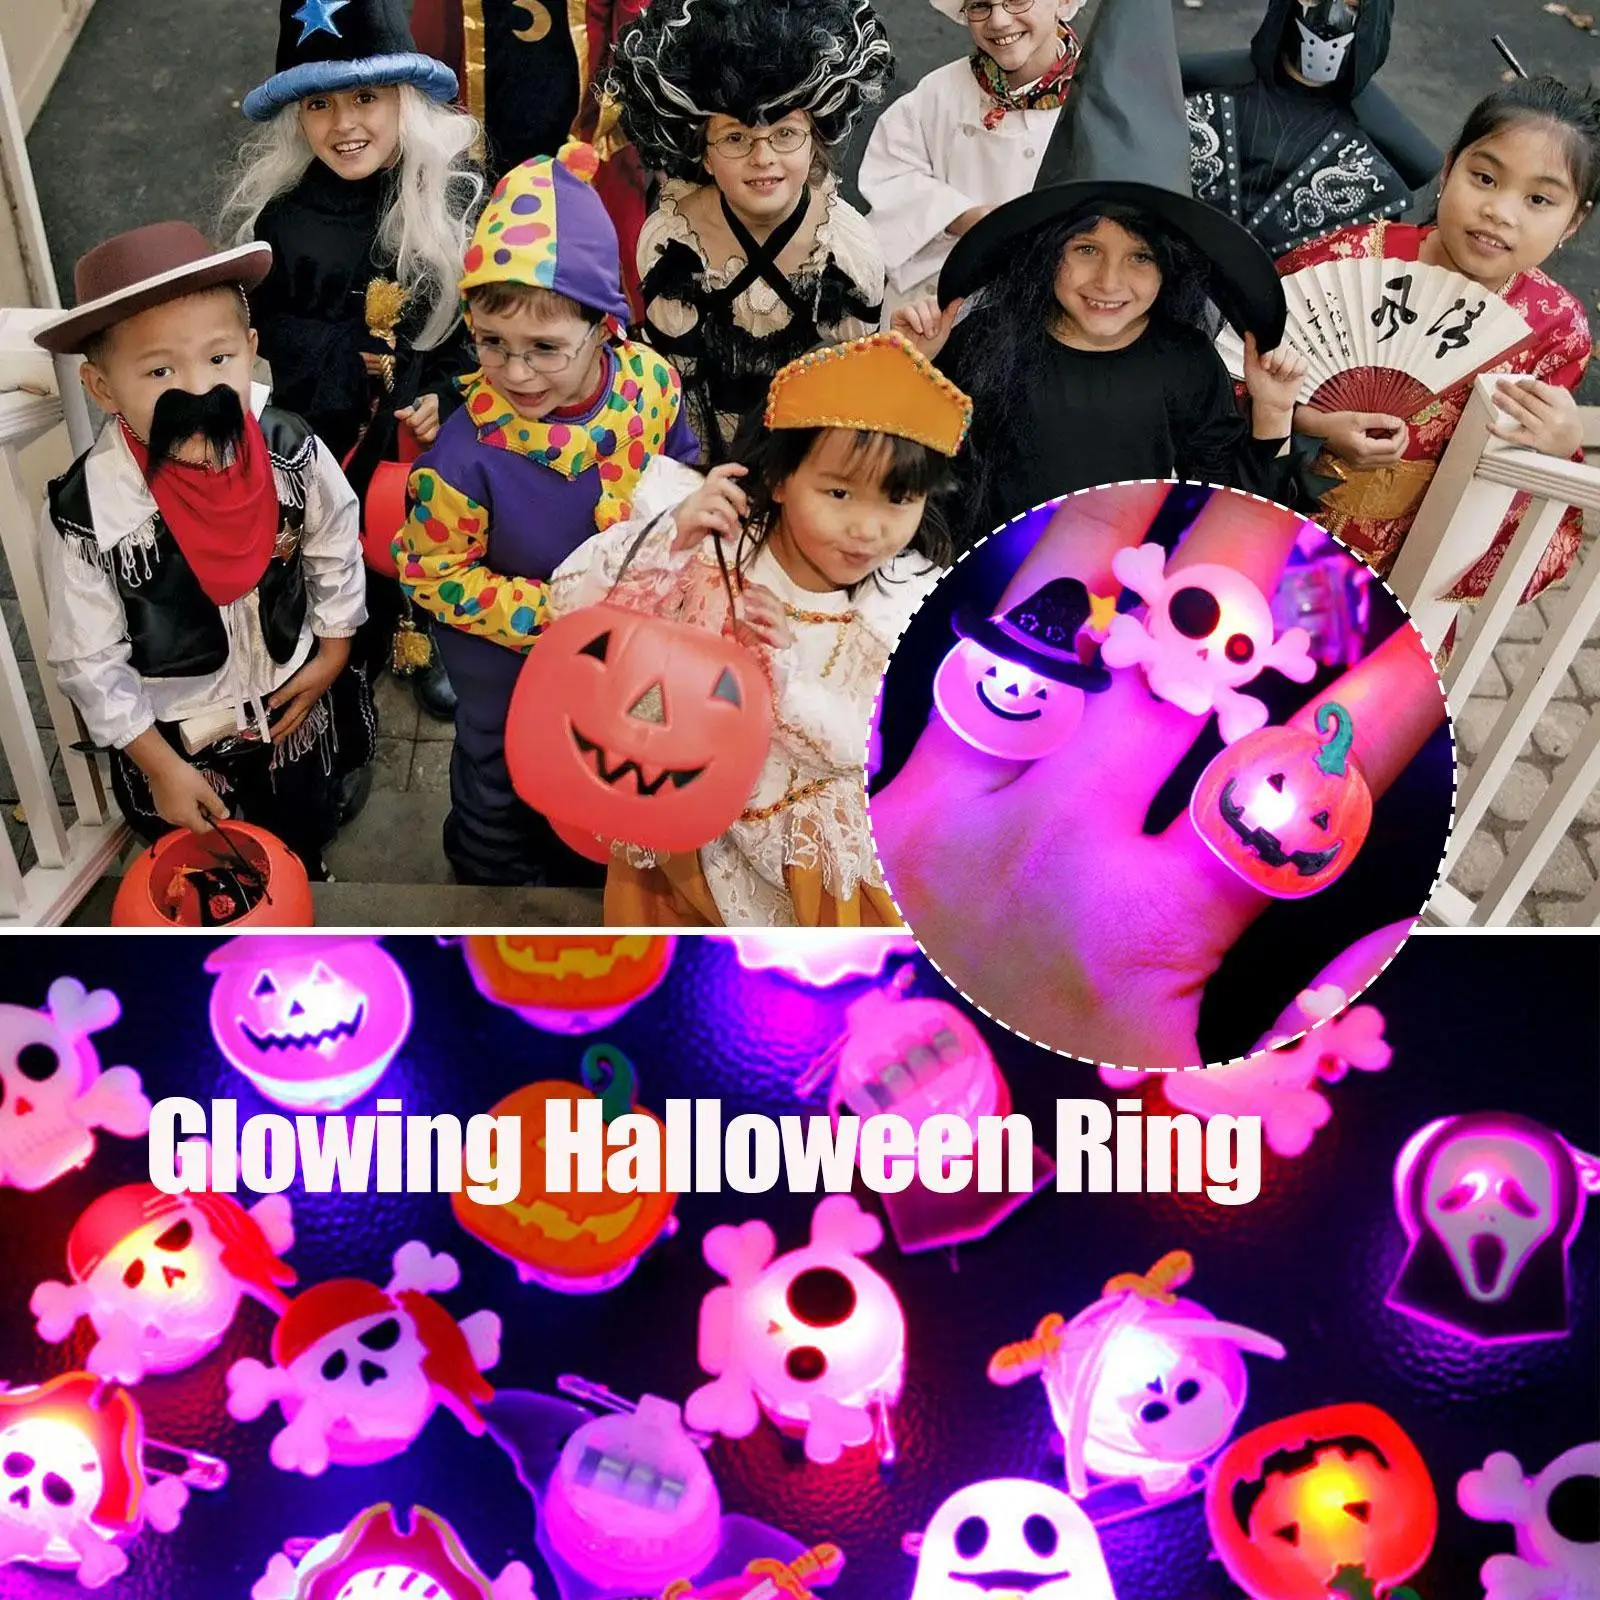 

10pcs Halloween Decorations Creative Cute Glowing Ring Brooch Pumpkin Ghost Skull Rings For Kids Gifts Halloween Party Supplies